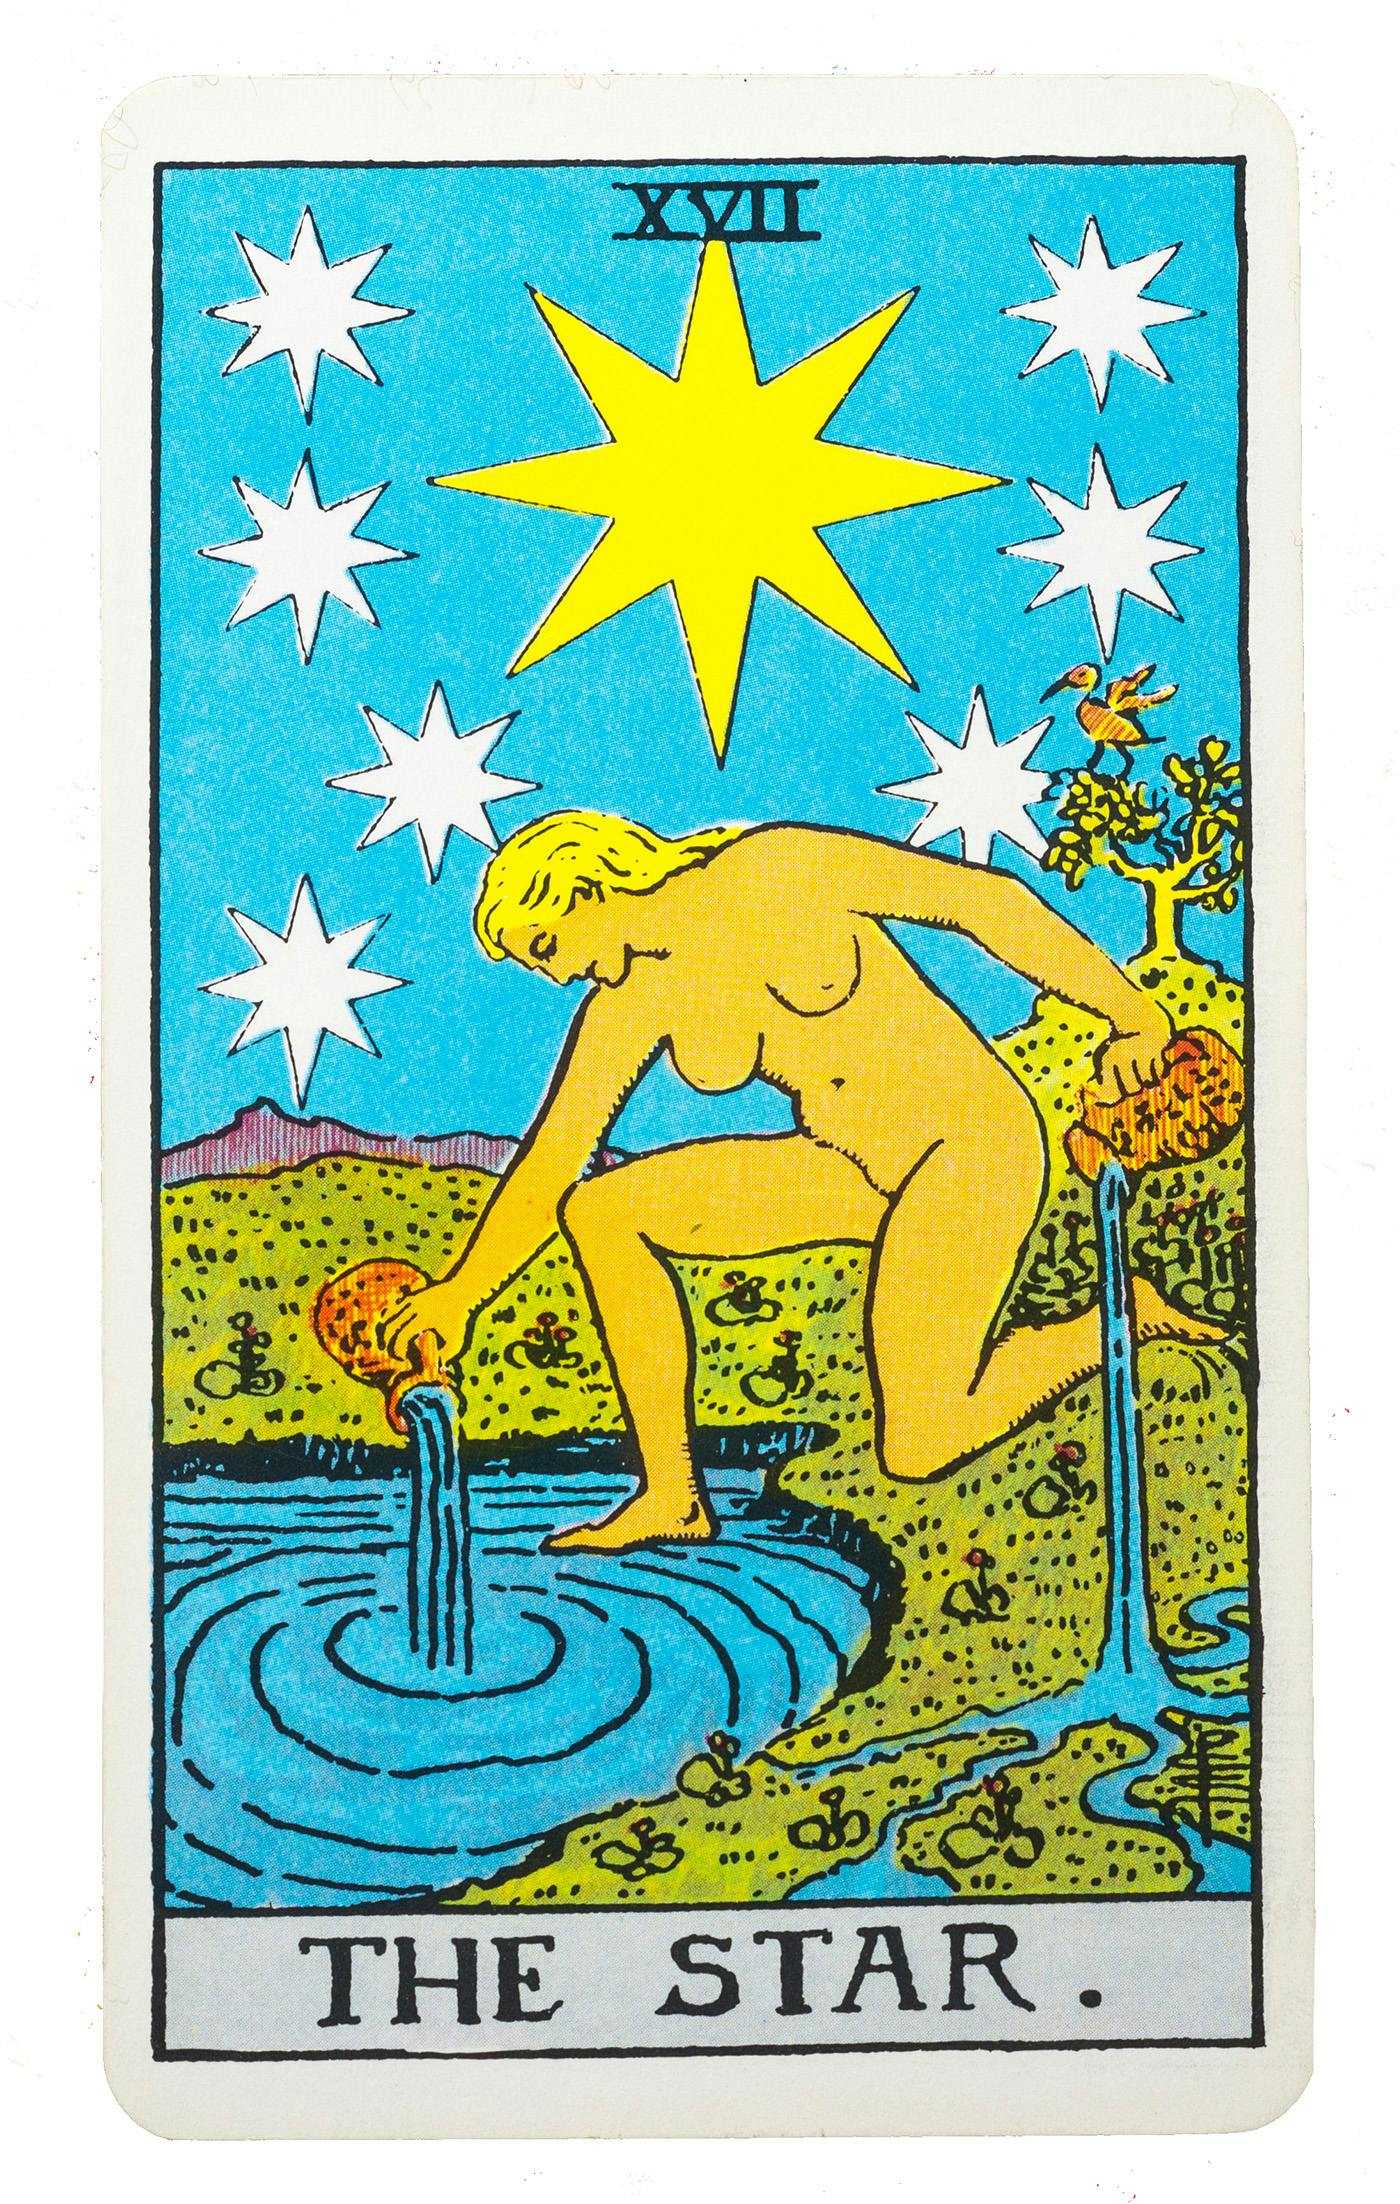 The Star tarot card from the rider-waite deck. Image of a woman kneeling by a lake pouring cups of water into the lake.